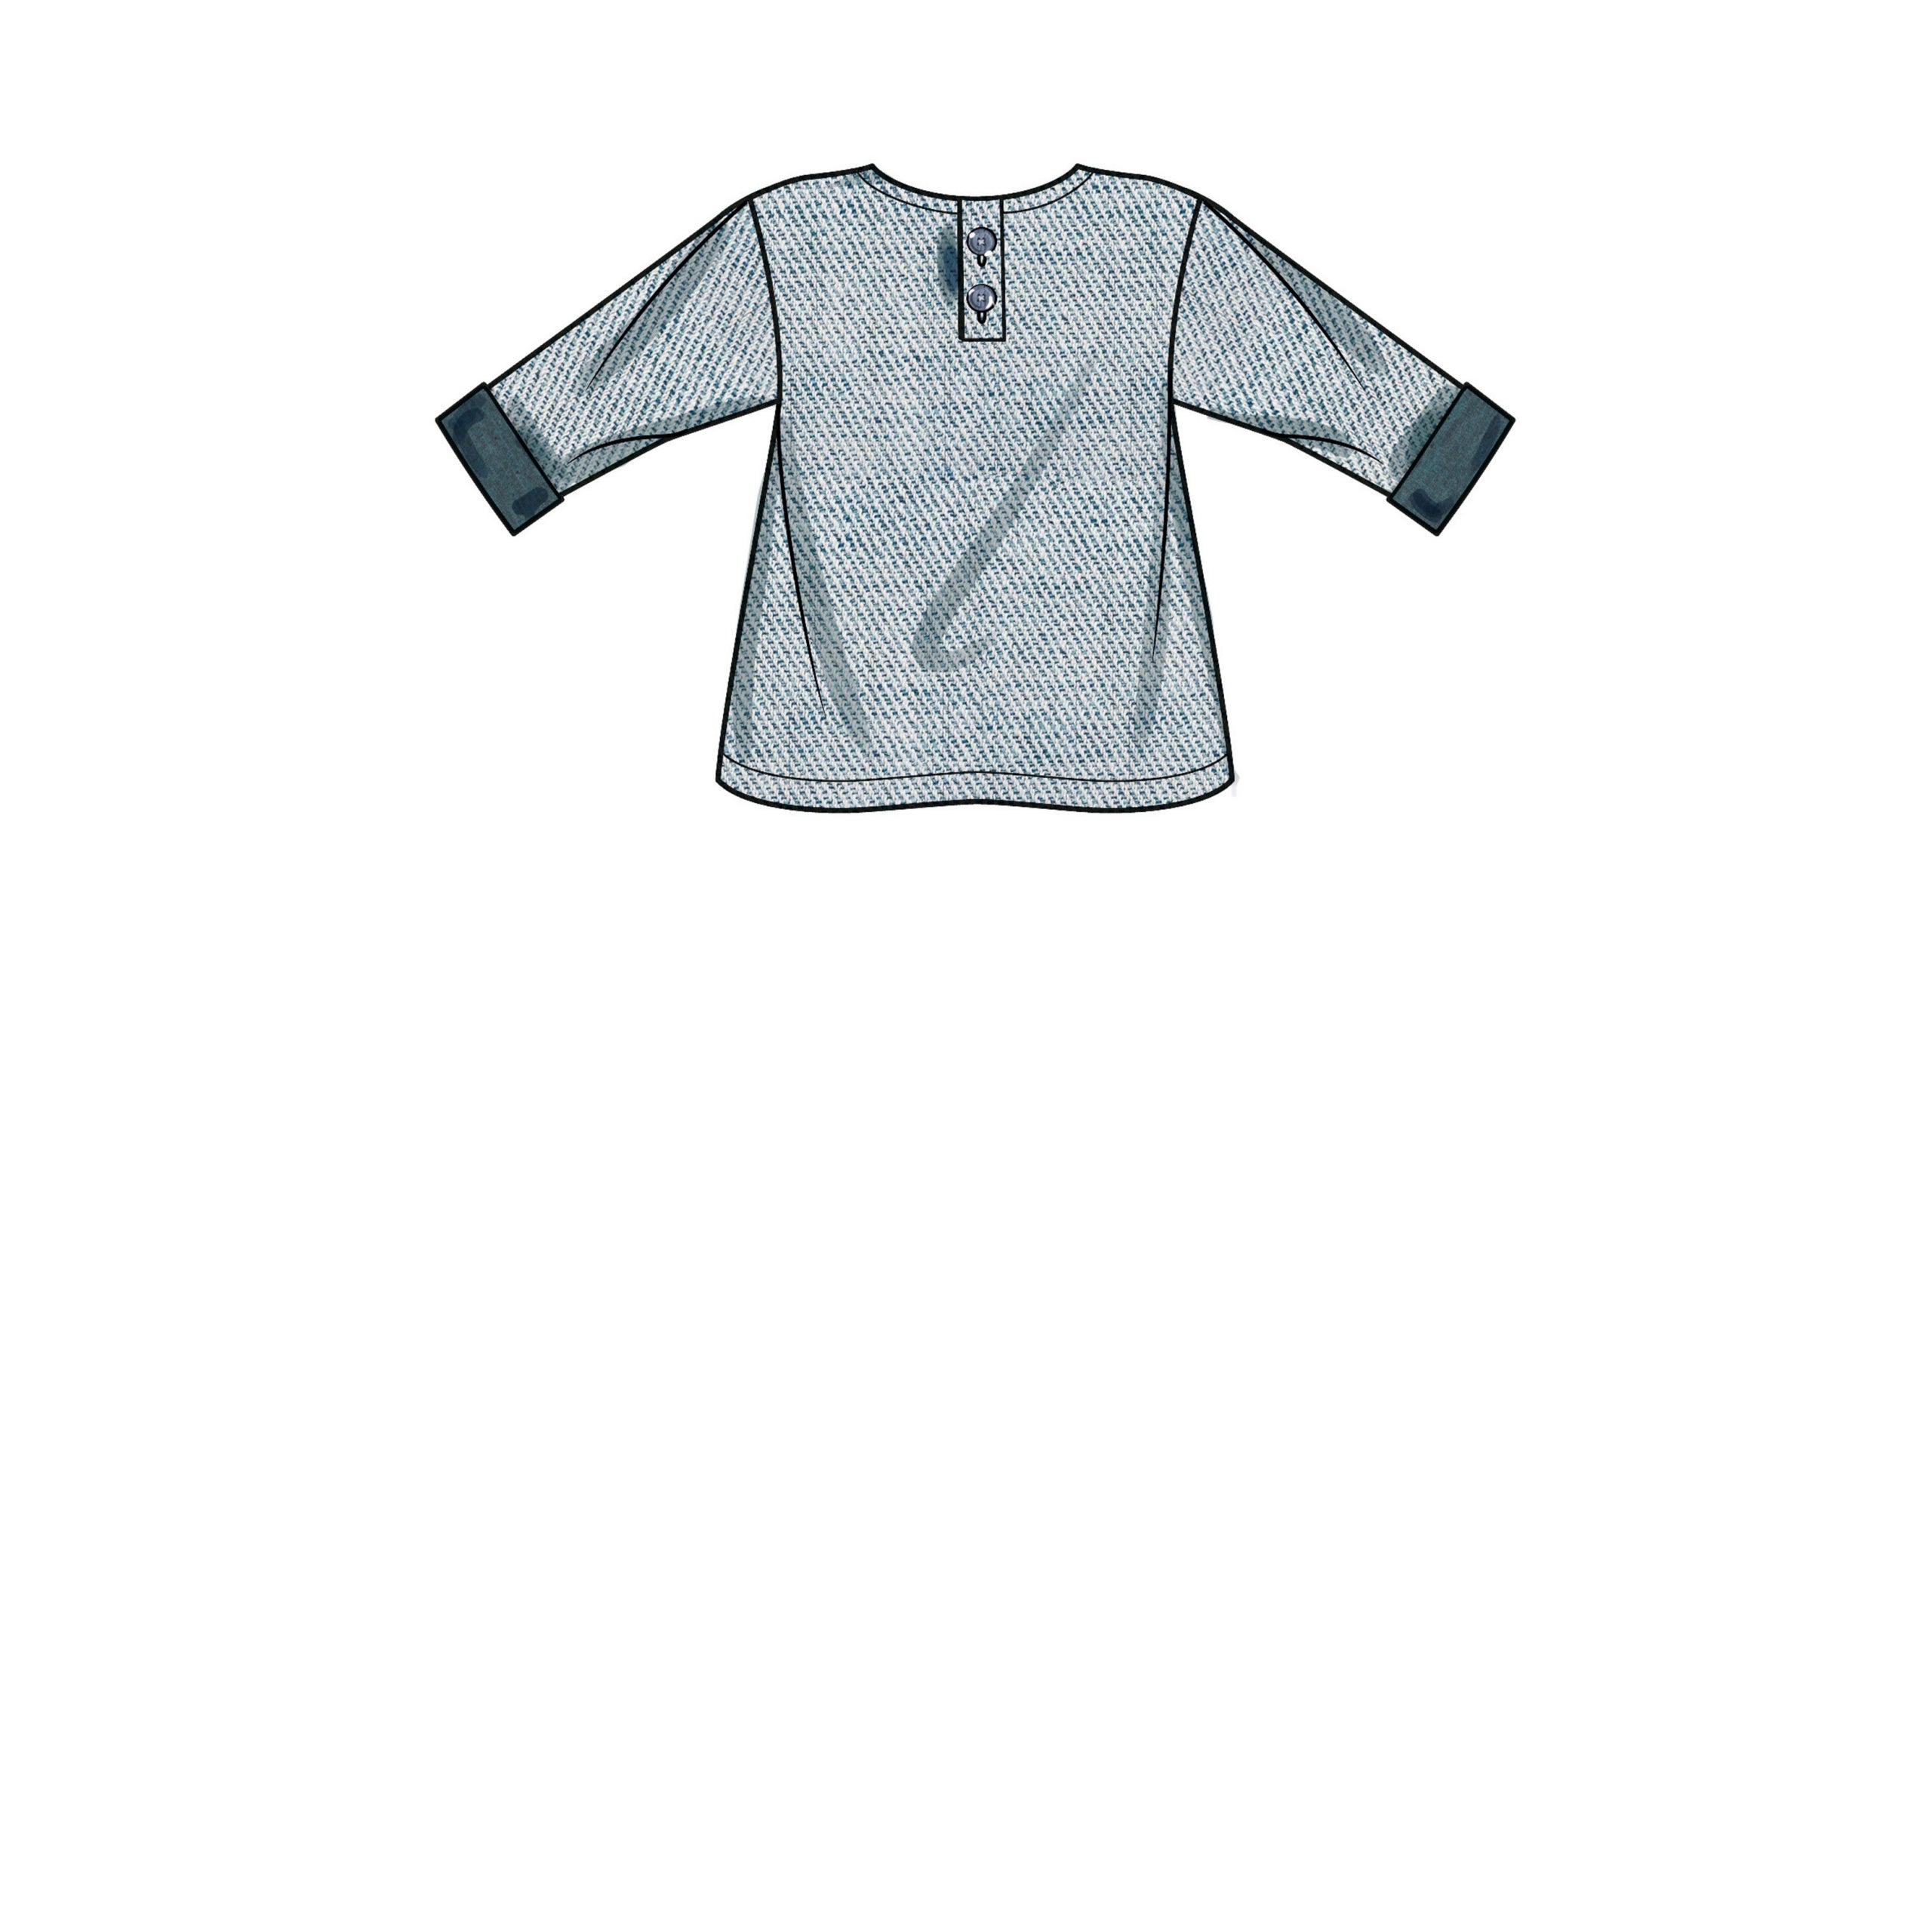 Simplicity Baby/Child Tops and Trousers S9652